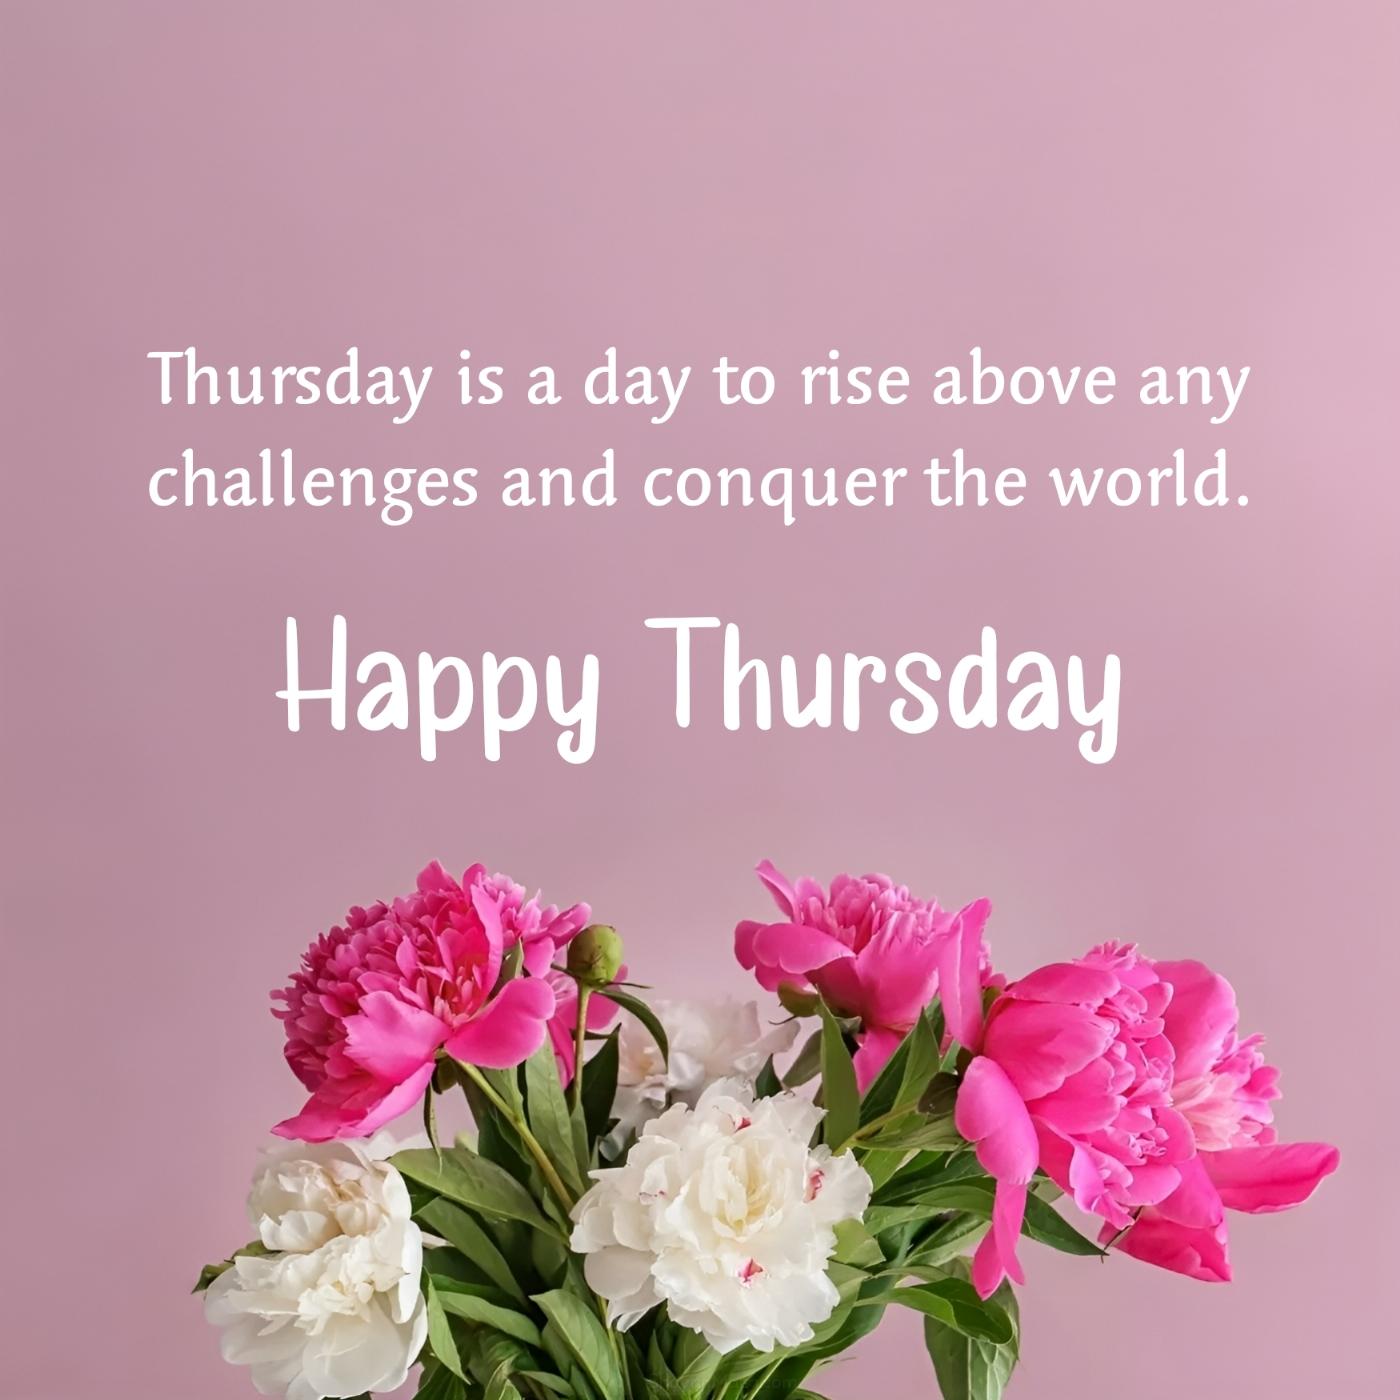 Thursday is a day to rise above any challenges